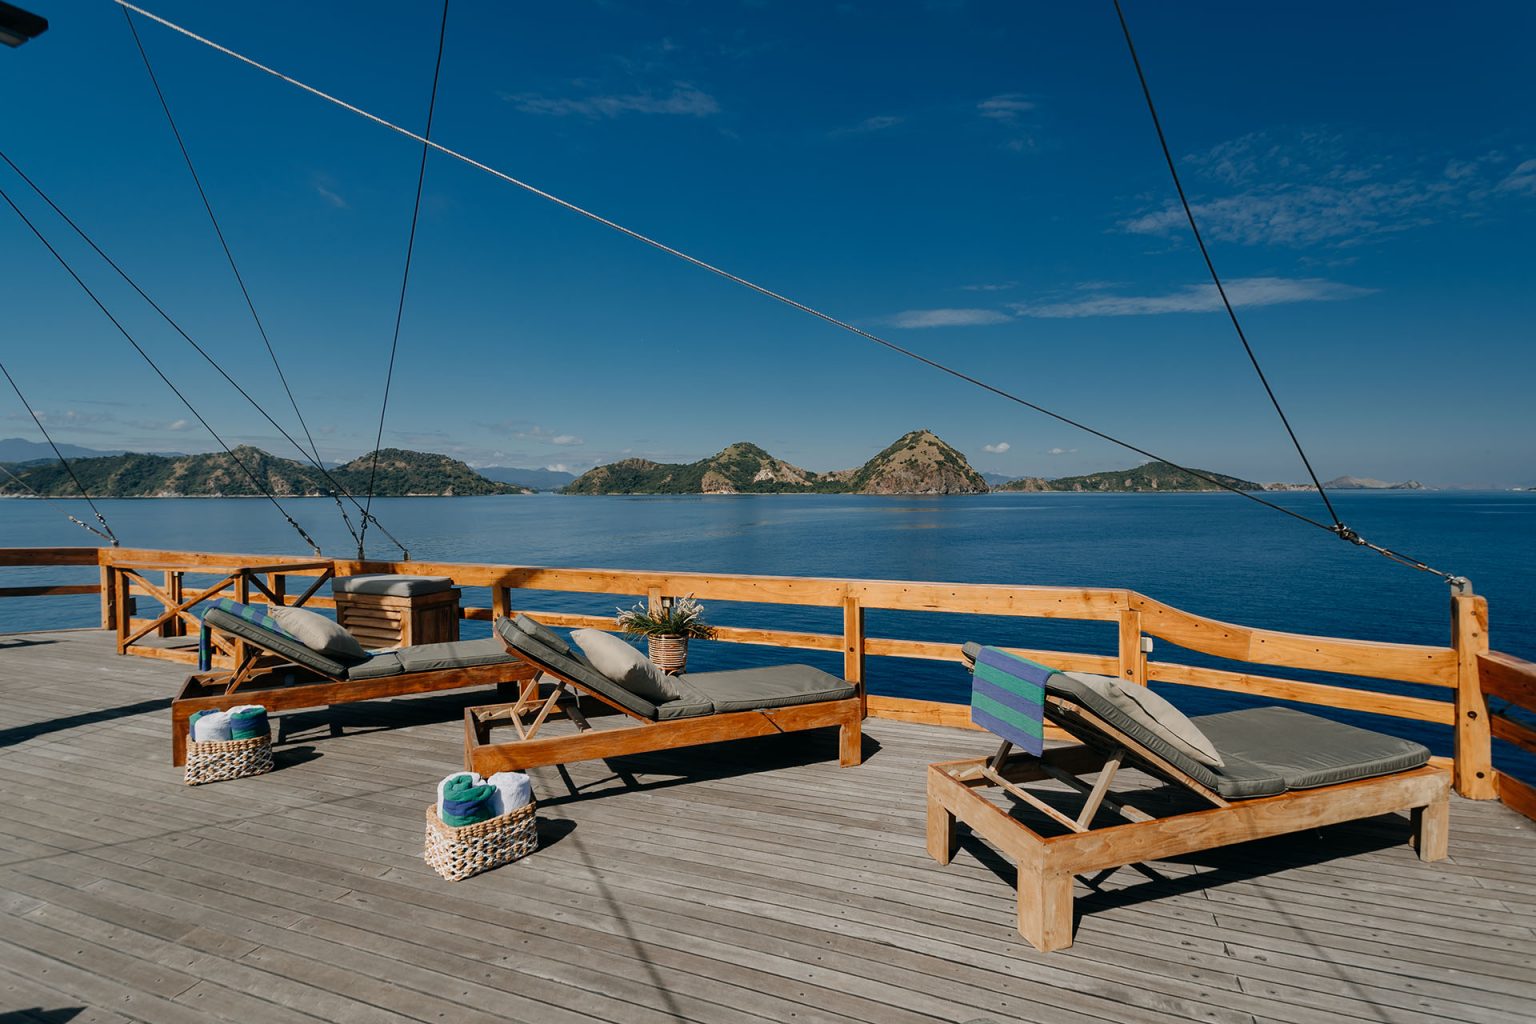 Phinisi Boat Rental Package Labuan Bajo with "Adishree" Liveaboard Charter - Diving - Prices 2022